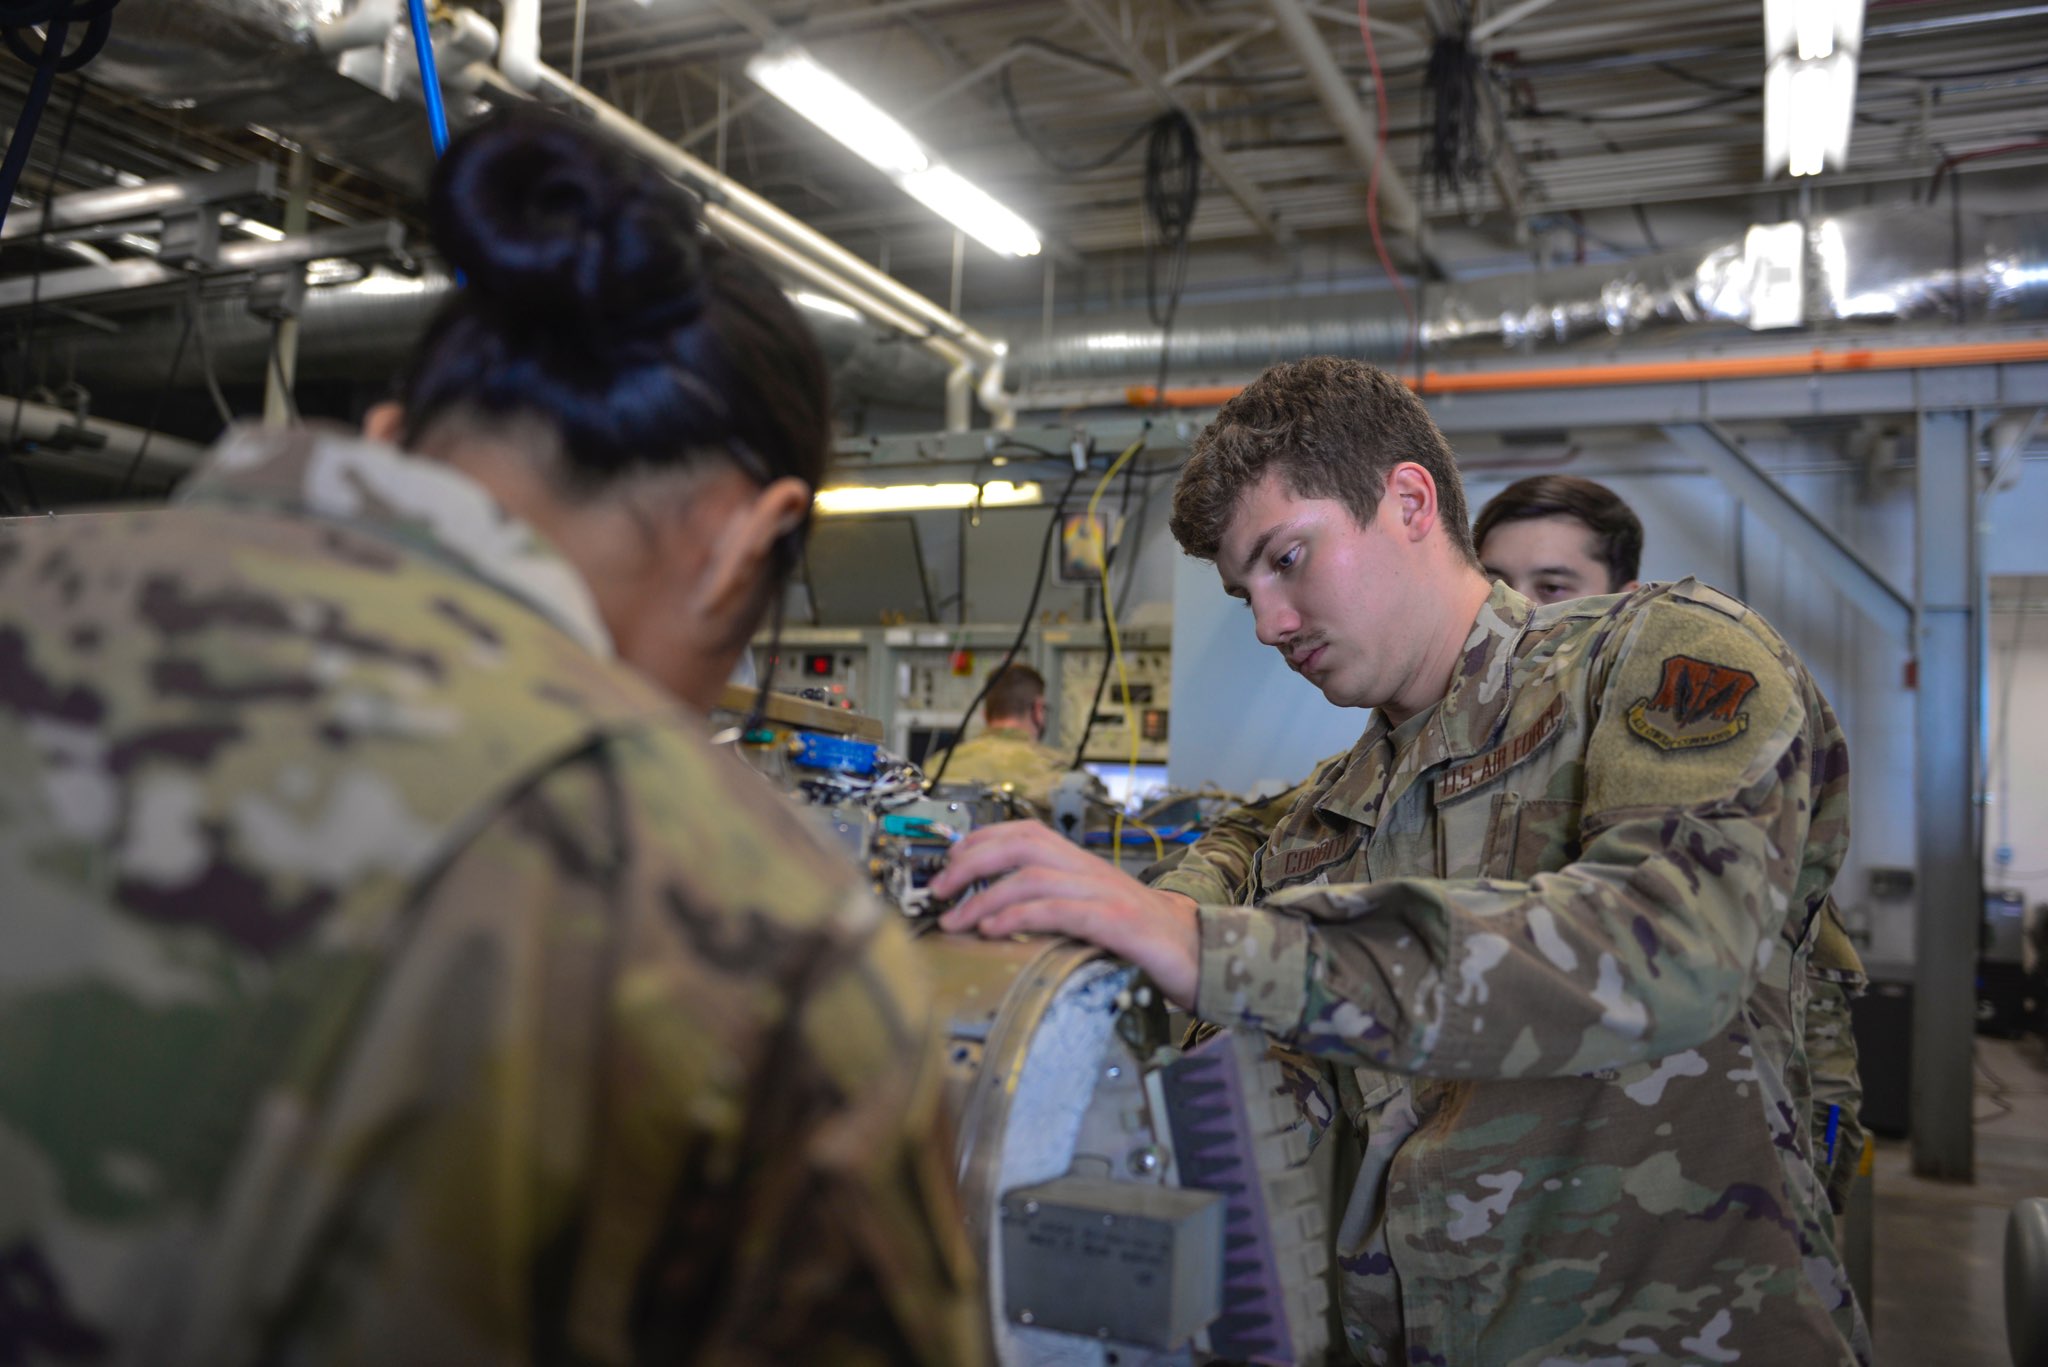 Members from the 36th Electronic Warfare Squadron work on an A4 module at Eglin Air Force Base, Florida, on August 29, 2022. <em>Credit: U.S. Air Force photo by Staff Sgt. Ericka A. Woolever</em>